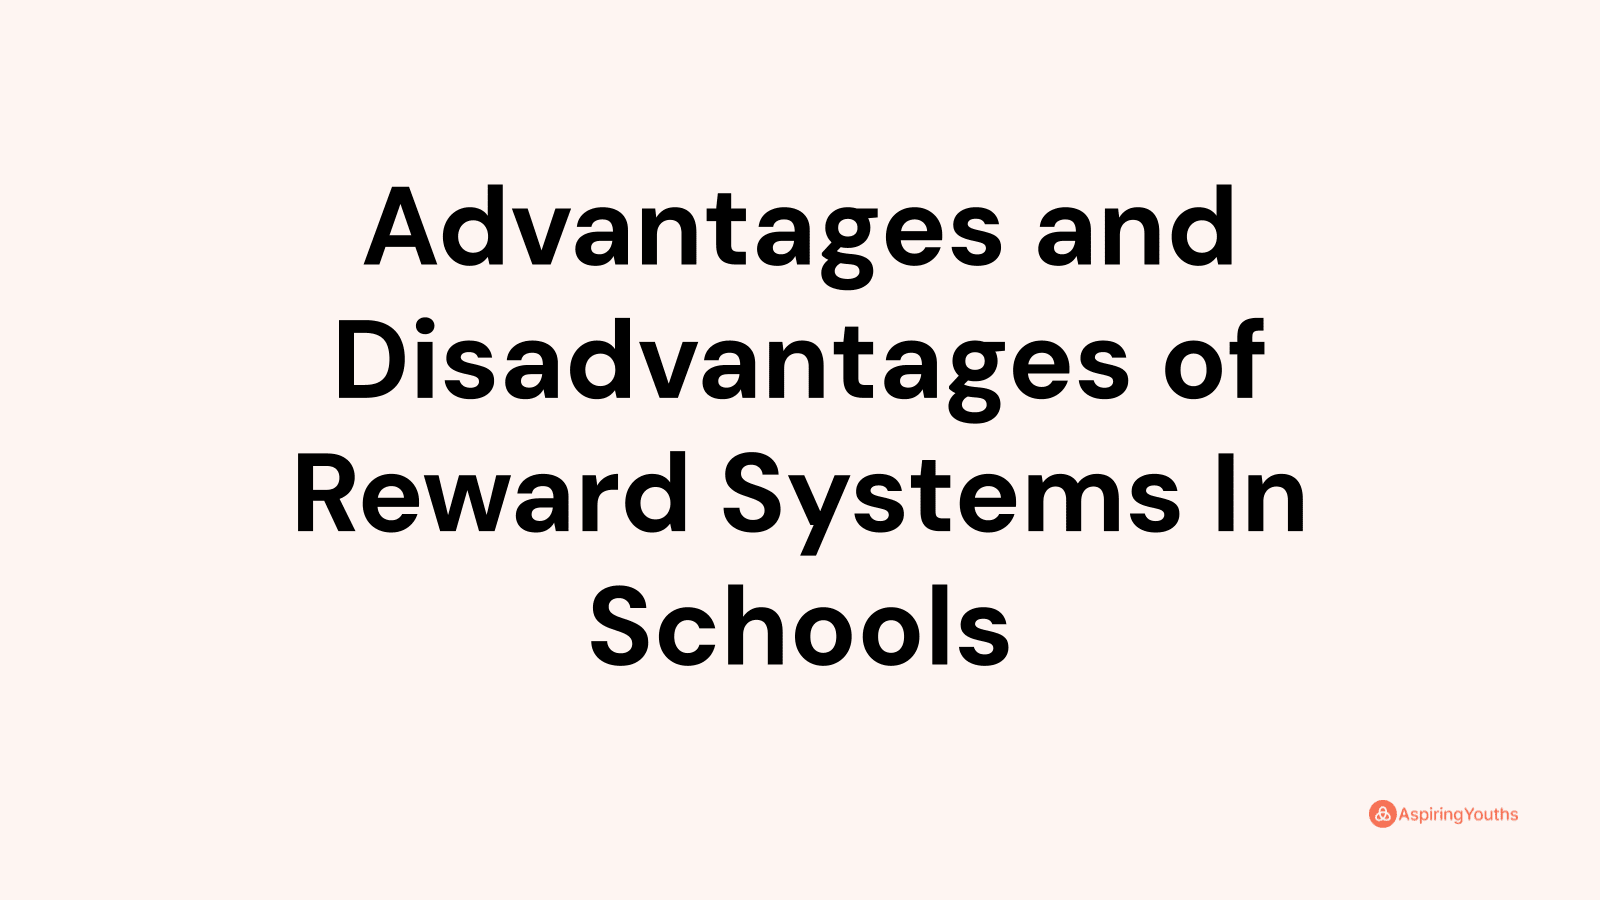 Advantages and disadvantages of Reward Systems In Schools